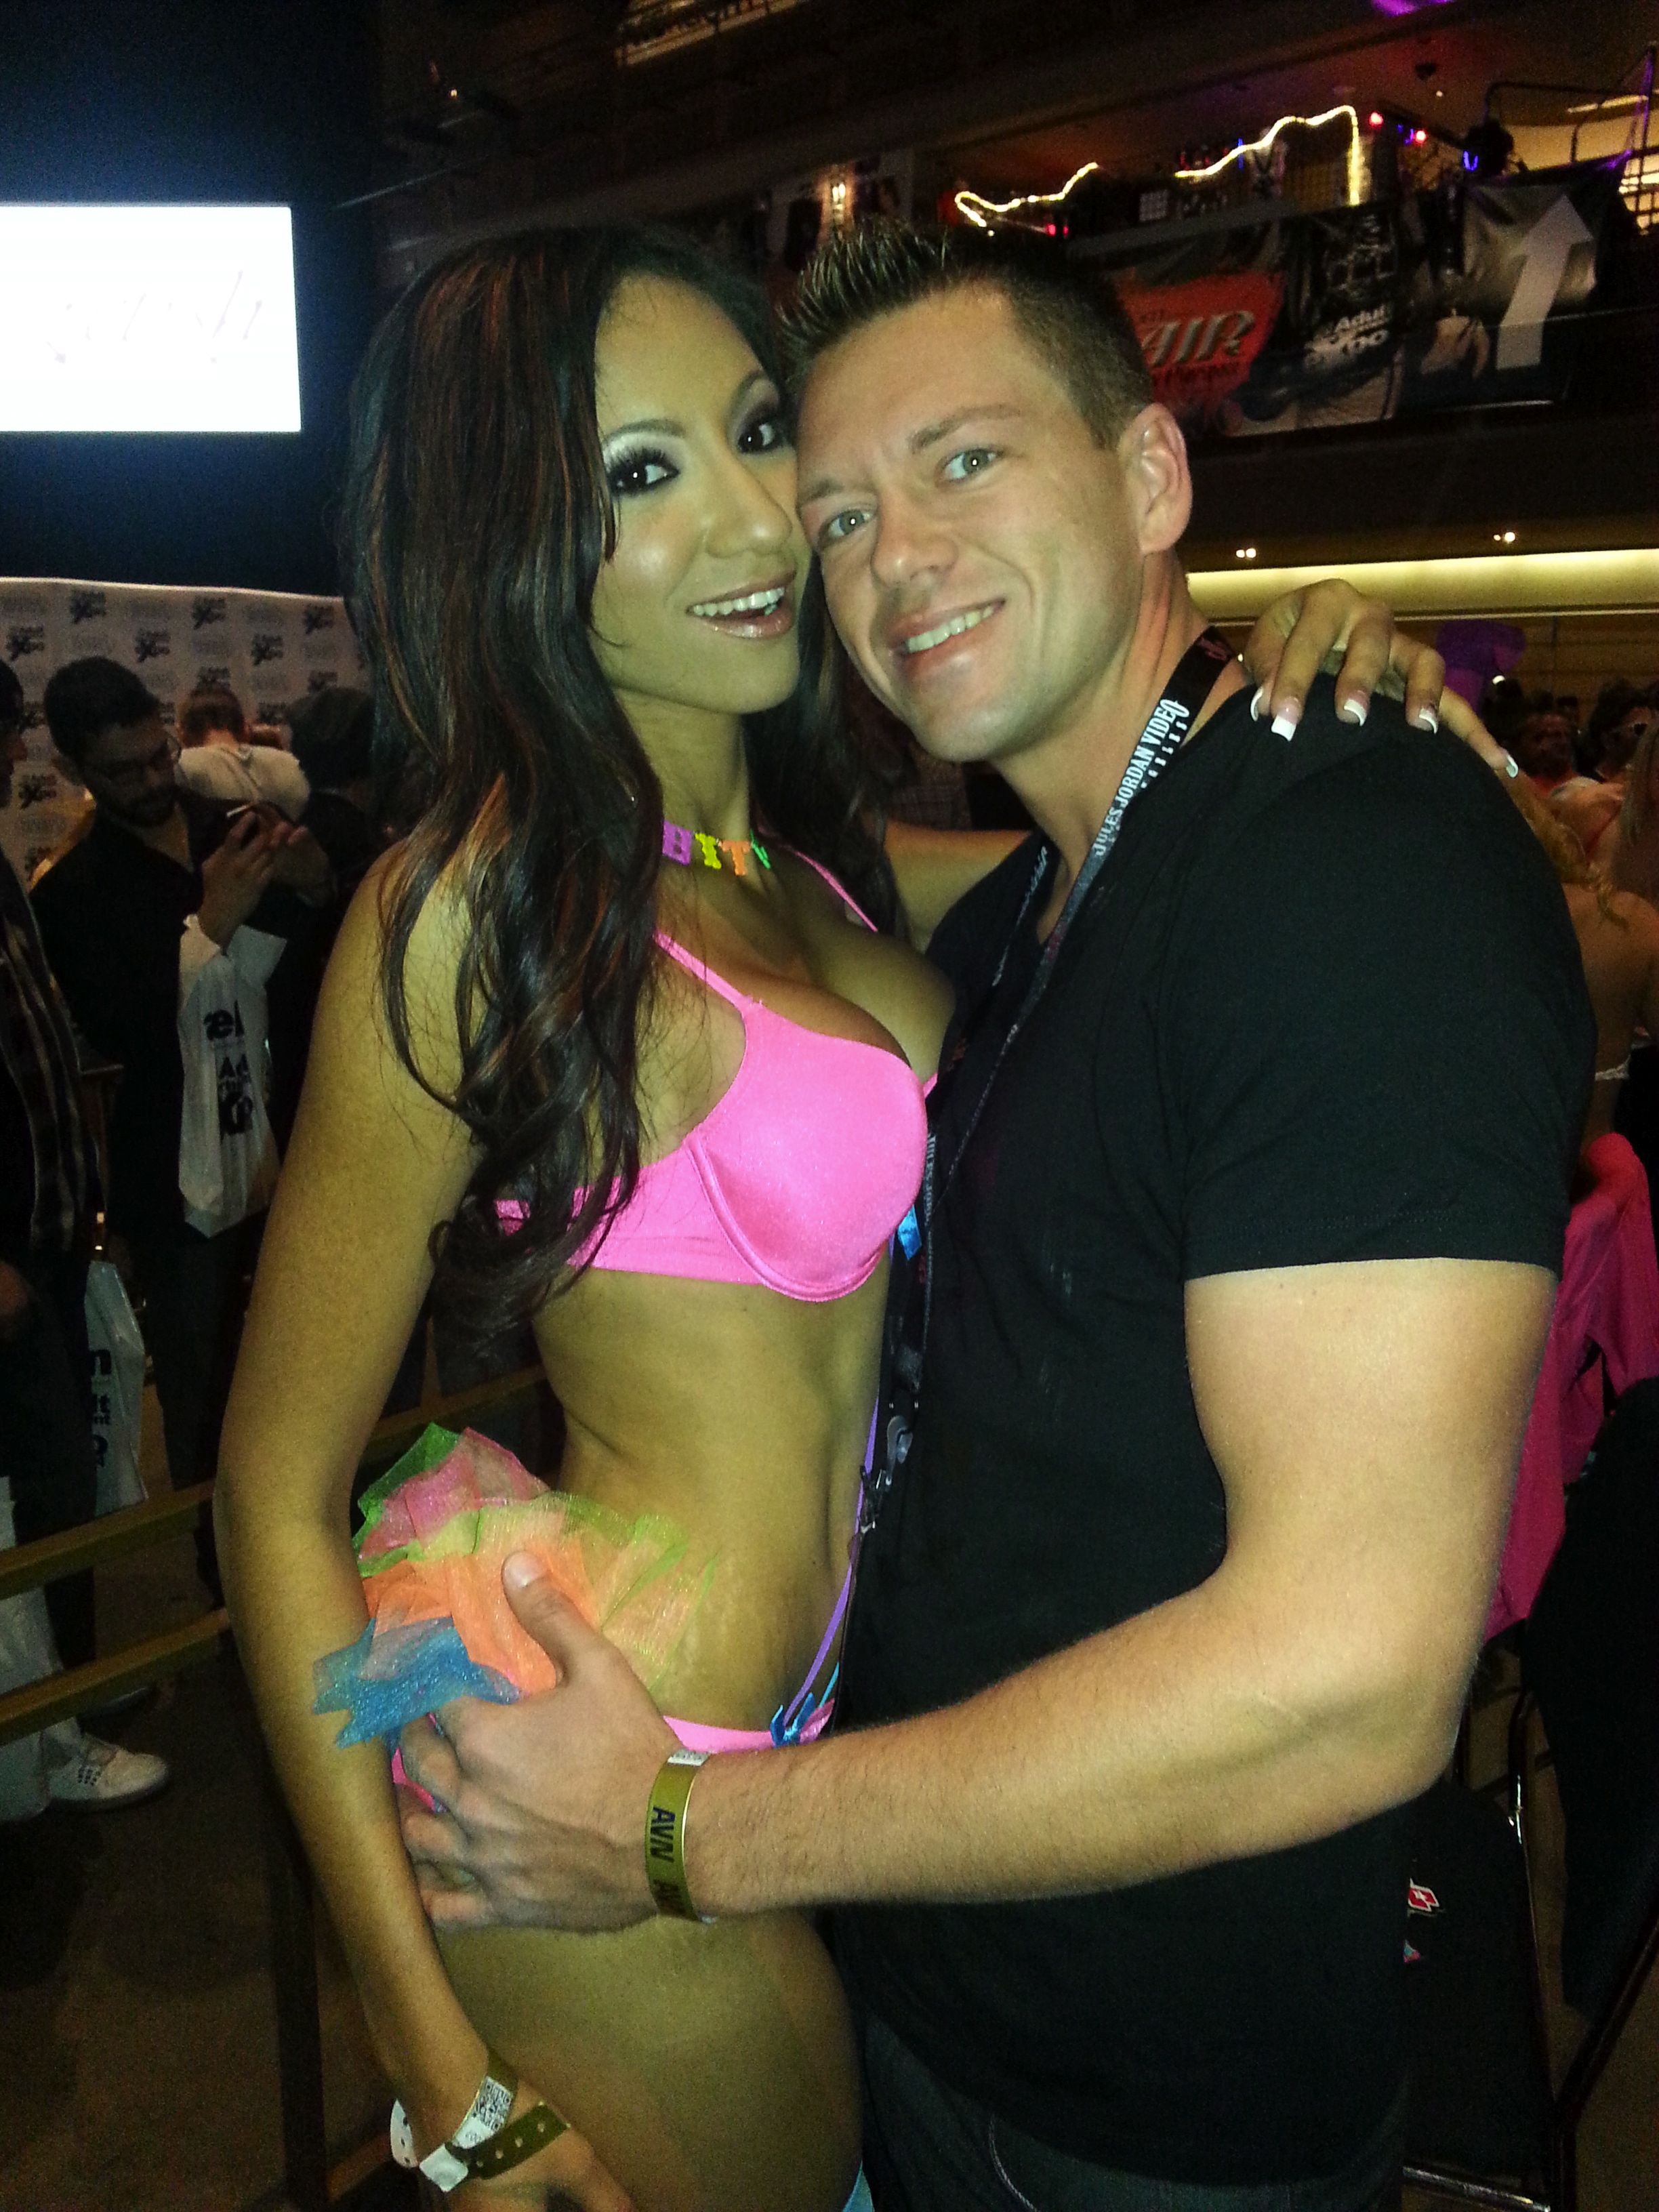 Sadie Santana and Jamie Stone attending the AVN Adult Entertainment Expo. They are pictured at the agency's booth.